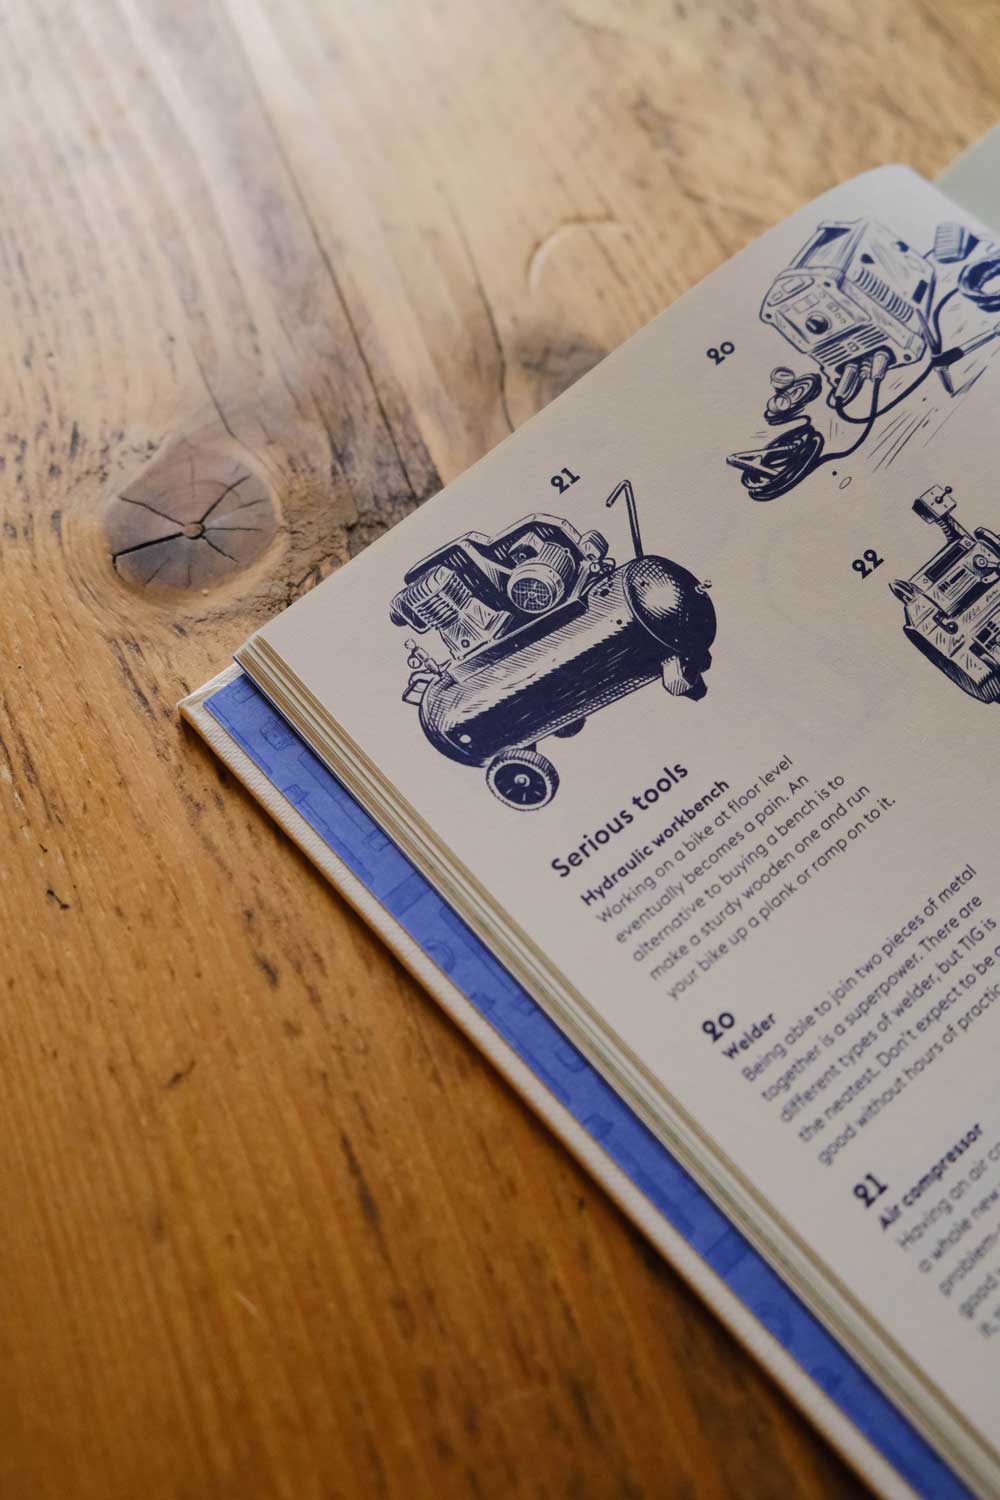 How To Build a Motorcycle illustrated book